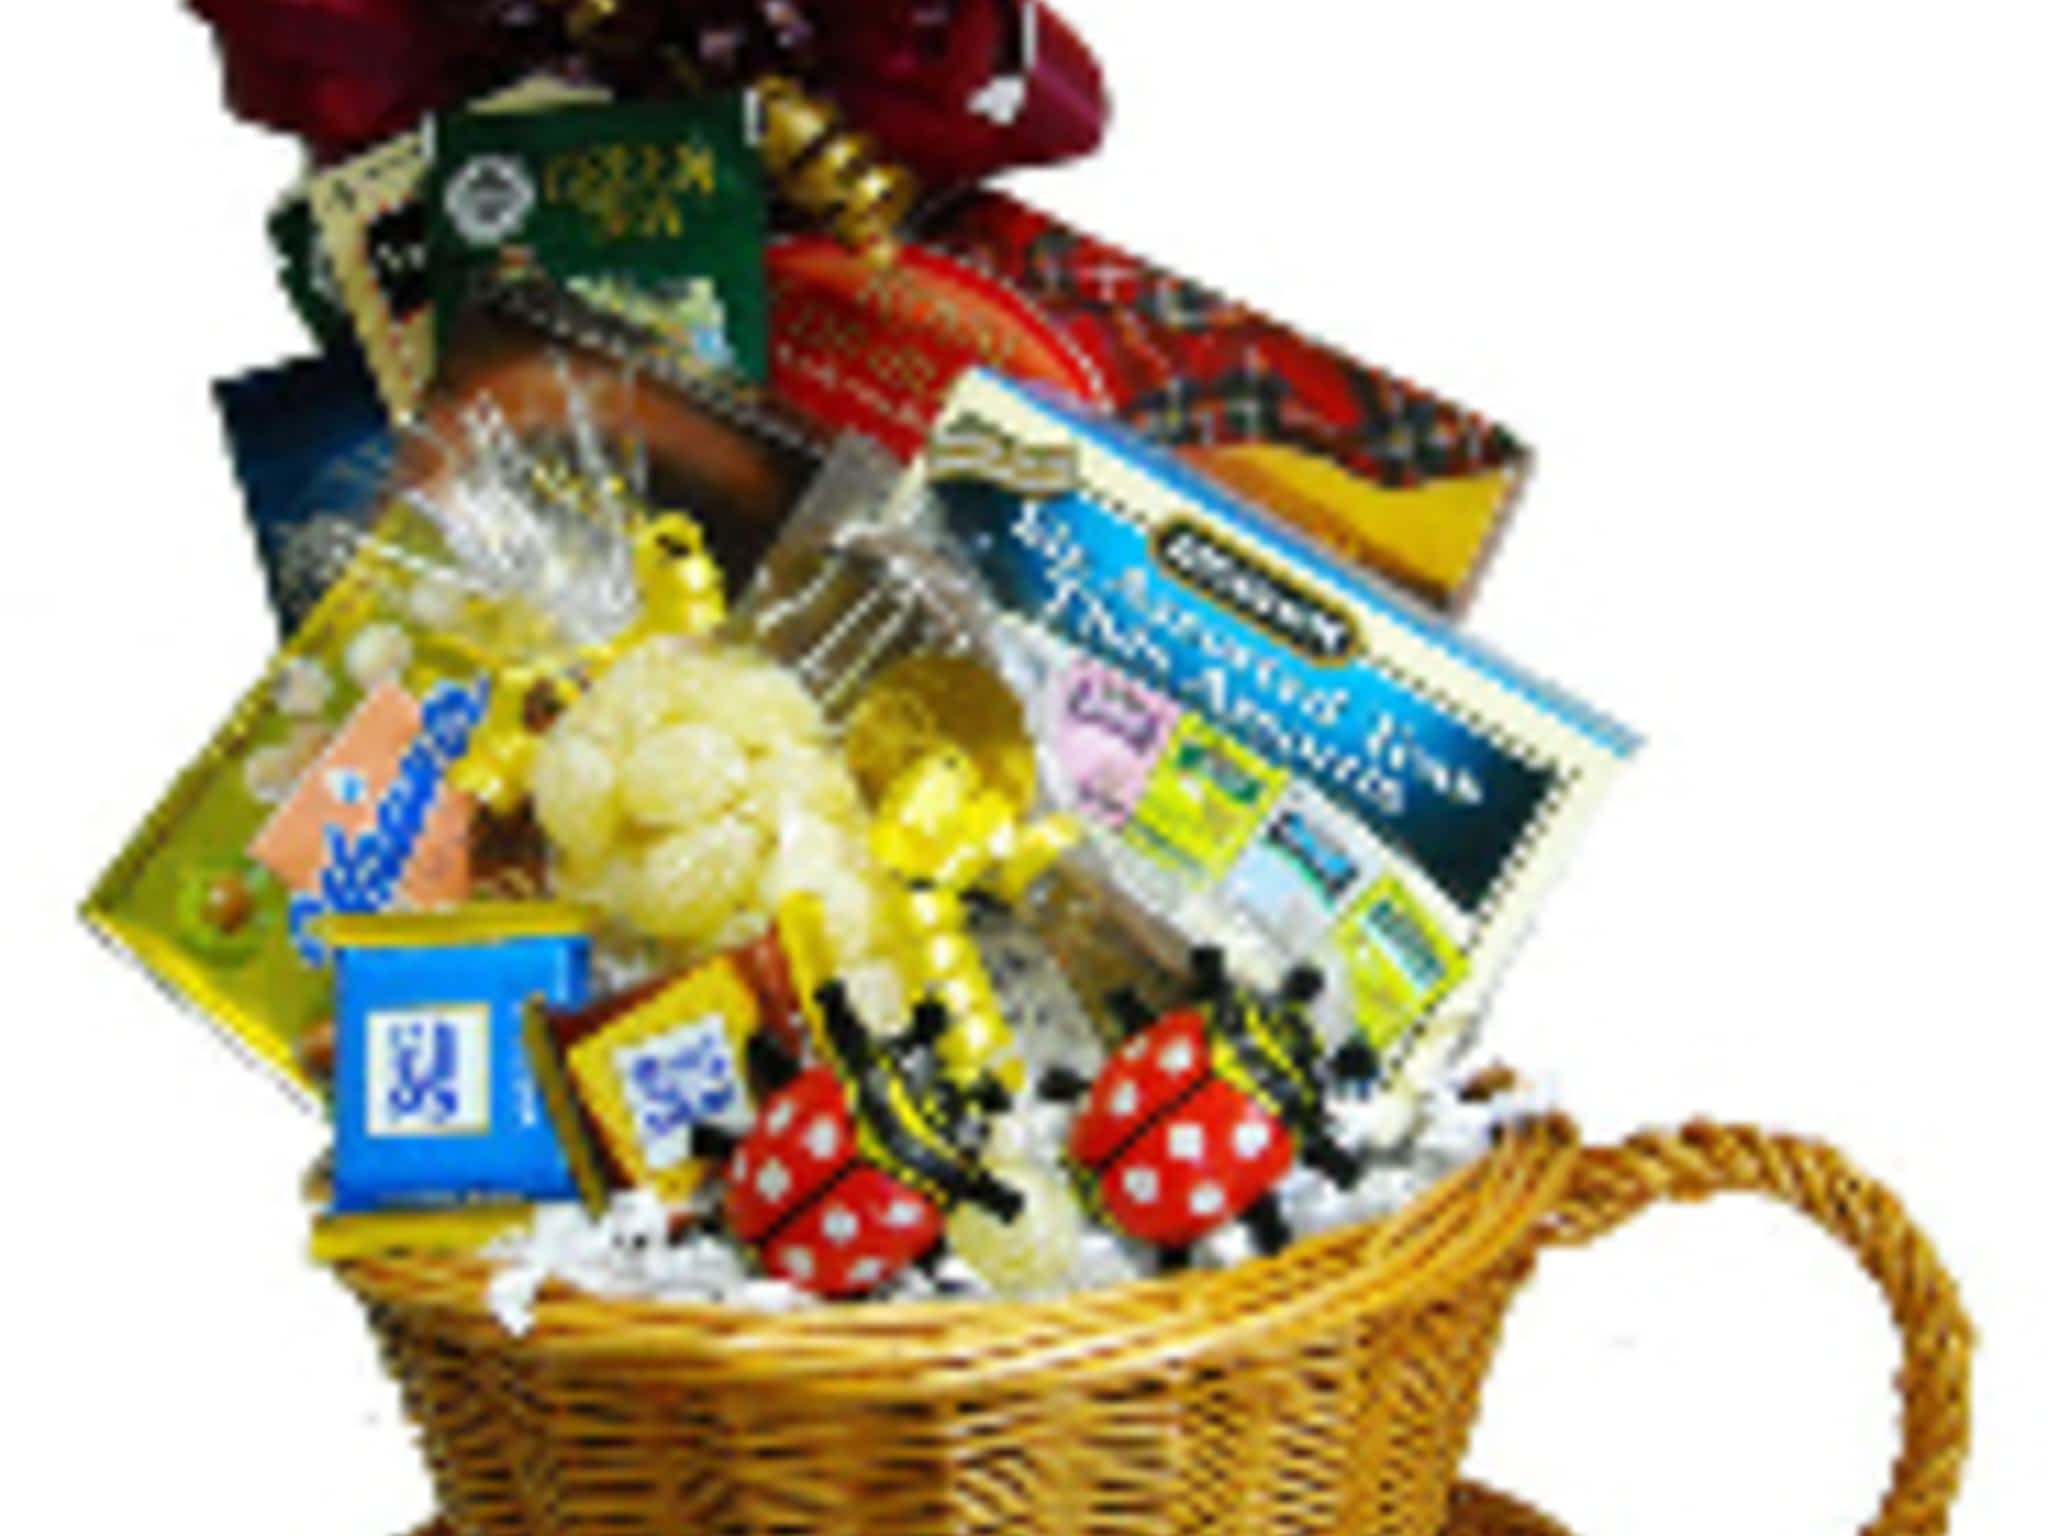 photo Baskets & Blooms For You Inc